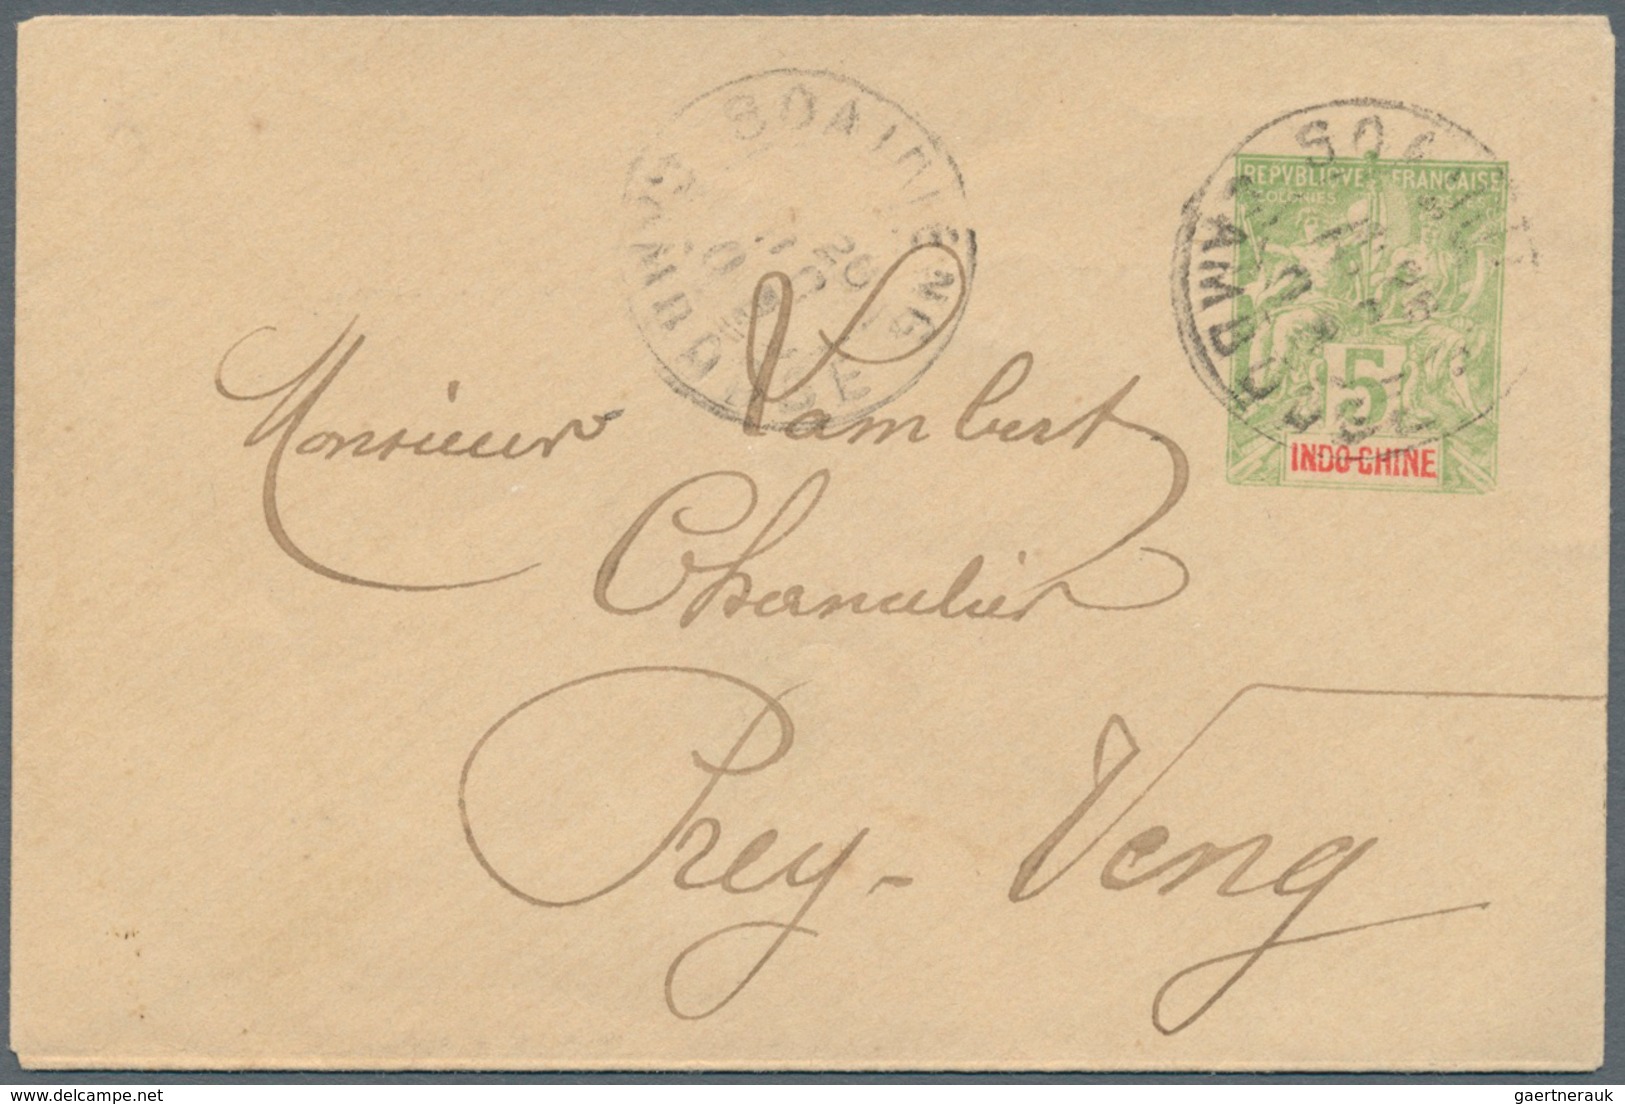 Kambodscha: 1903. French Indo-China Postal Stationery Envelope 5c Yellow- Green Cancelled By Soairie - Cambodia